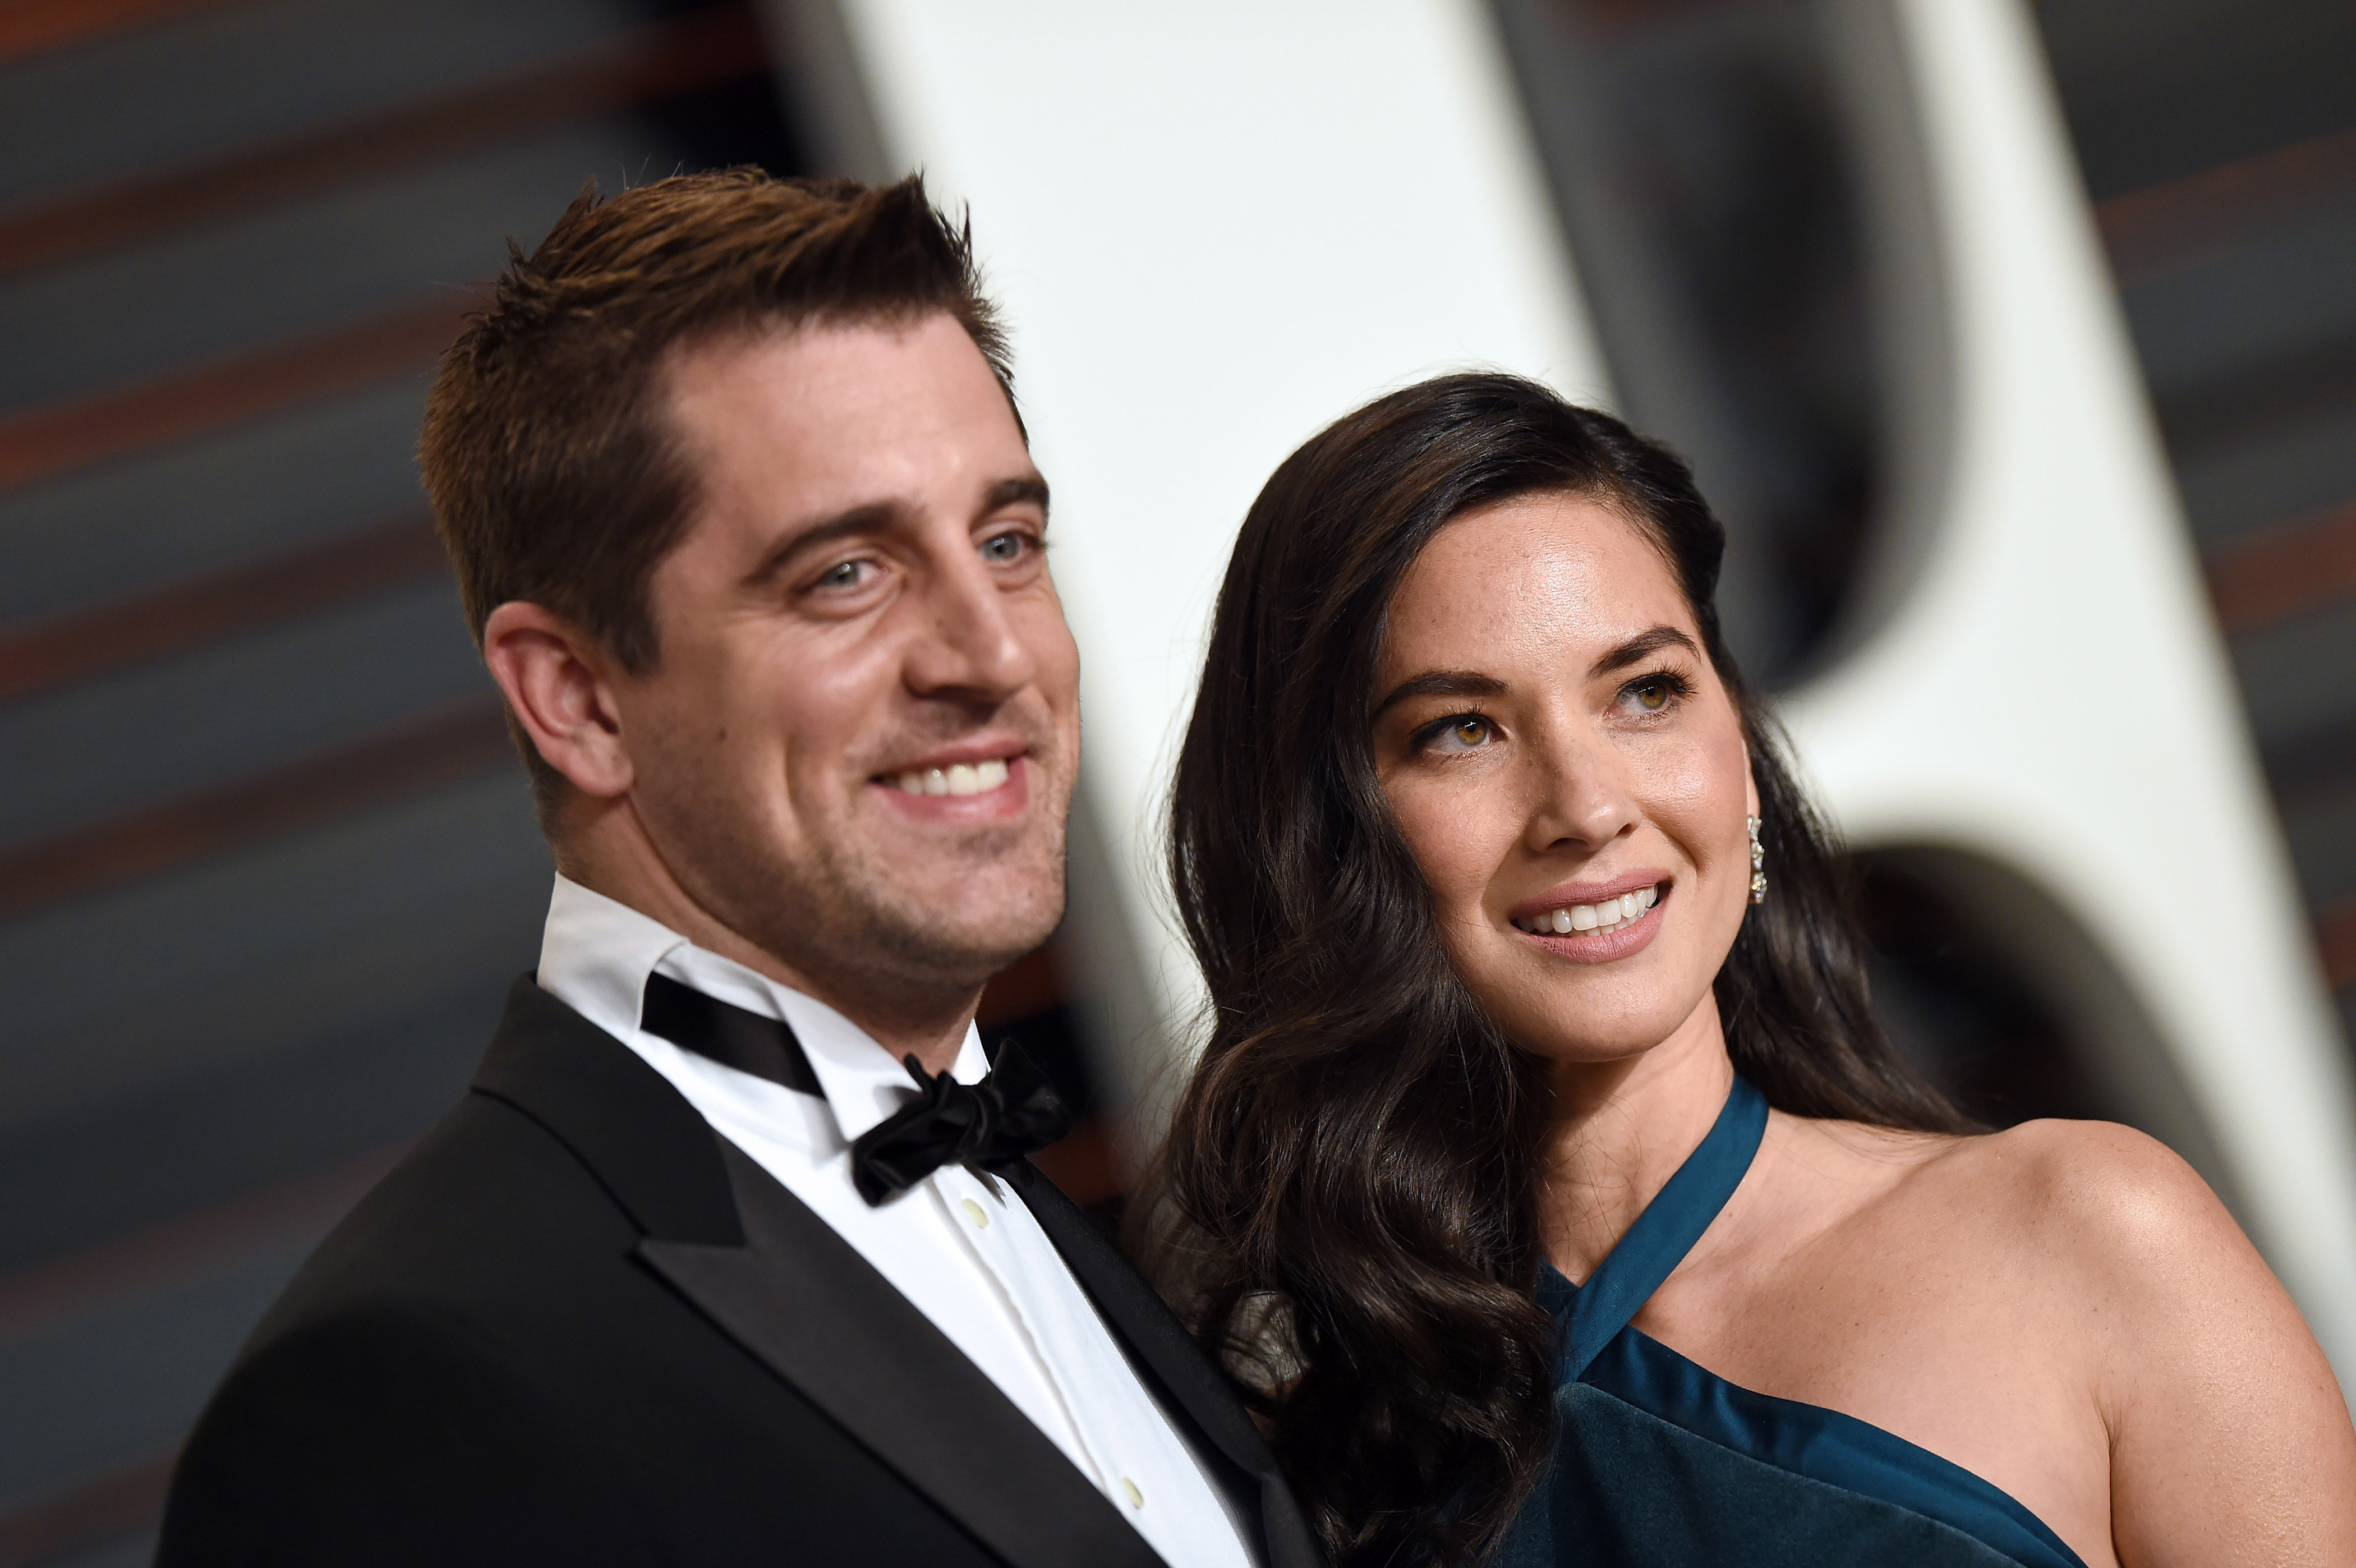 Aaron Rodgers and actress Olivia Munn arrive at the 2015 Vanity Fair Oscar Party Hosted By Graydon Carter at Wallis Annenberg Center for the Performing Arts on February 22, 2015 in Beverly Hills, California.  (Photo by Axelle/Bauer-Griffin/FilmMagic) (Axelle/Bauer-Griffin—FilmMagic/Getty Images)